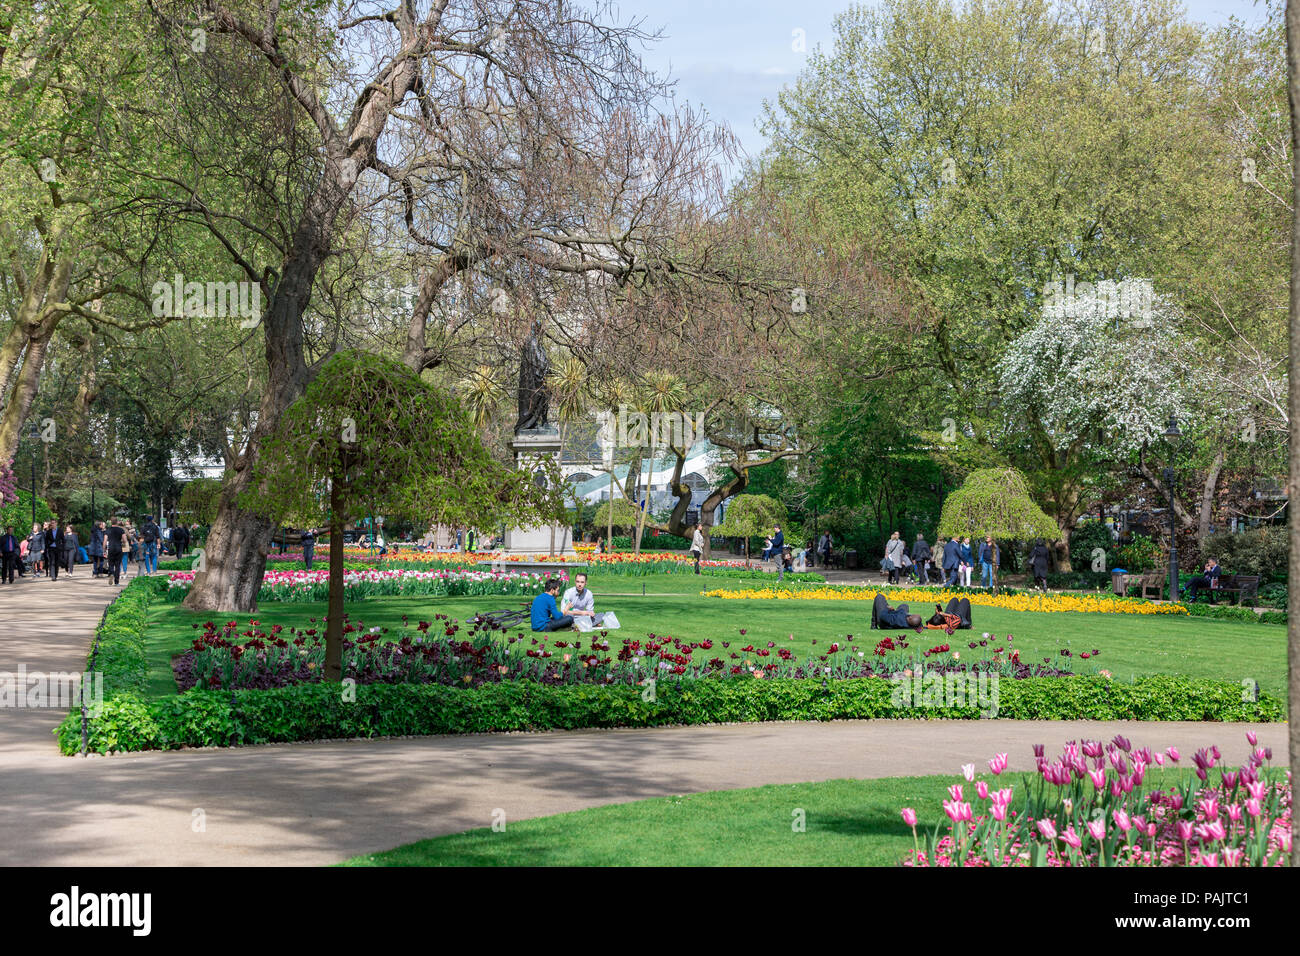 image of people in a London park in the spring of 2017 Stock Photo